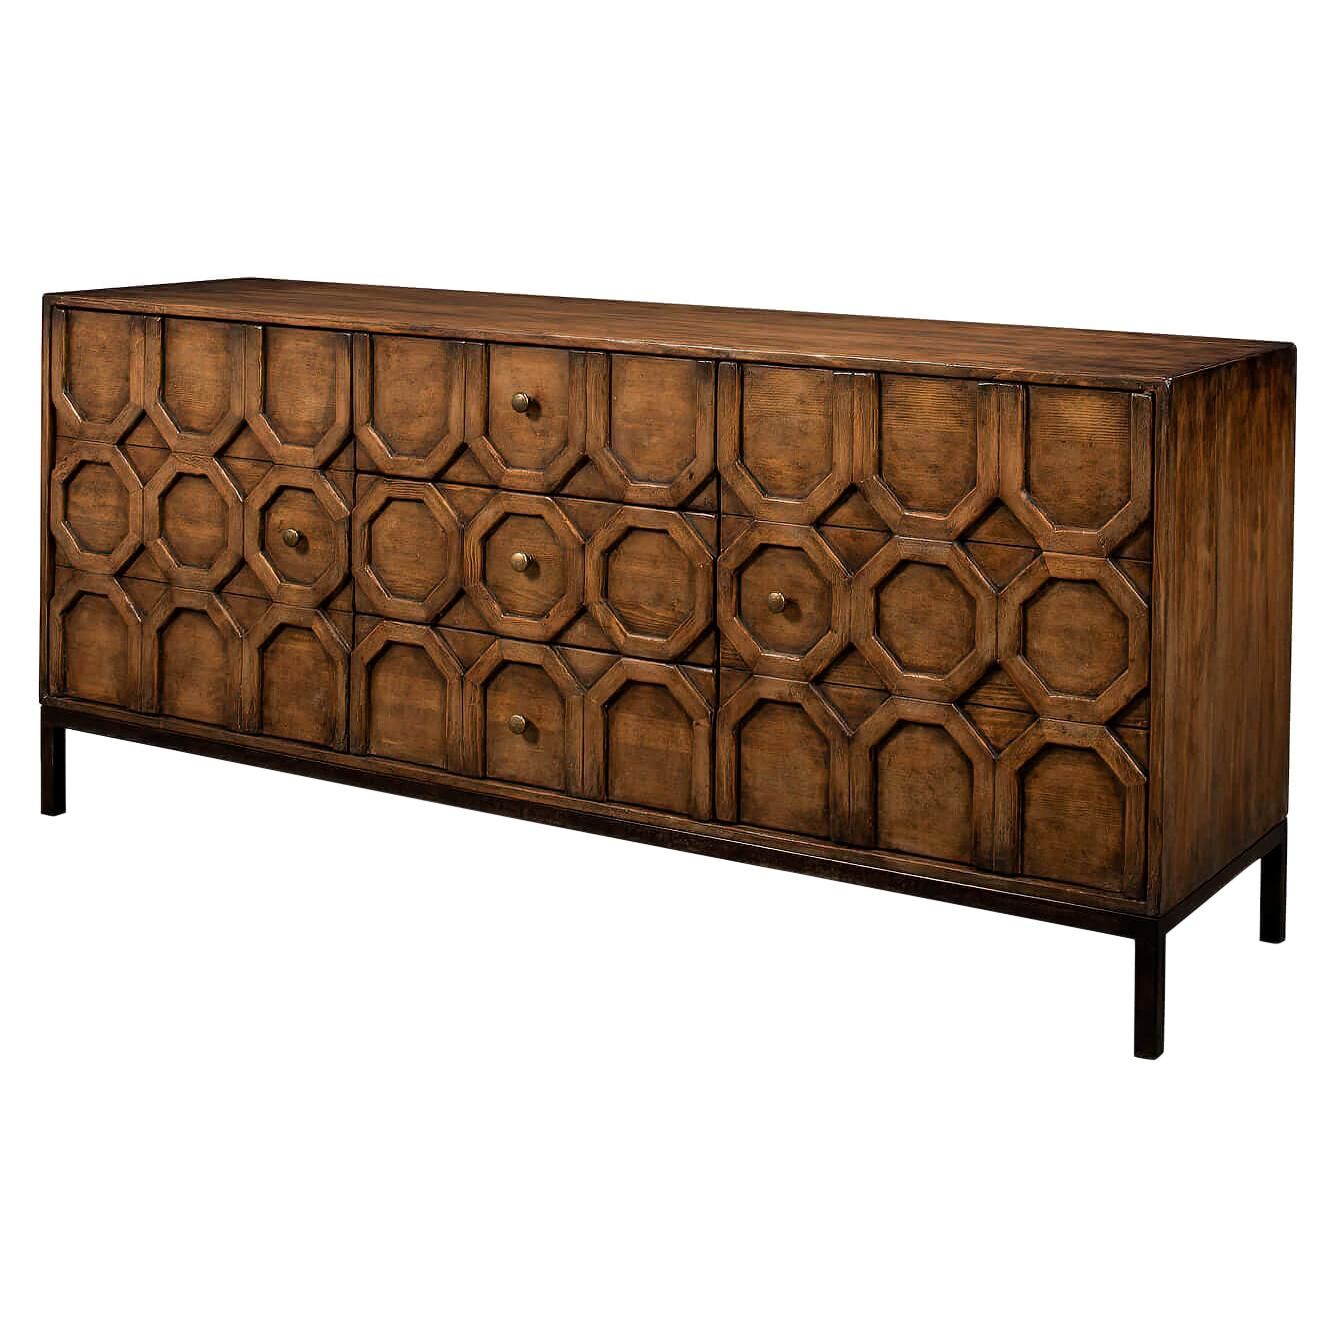 Modern Geometric Sideboard For Sale At 1stdibs | Geometric Buffet Cabinet, Sideboard  Geometric, Modern Sideboard With Regard To 2017 Geometric Sideboards (View 5 of 15)